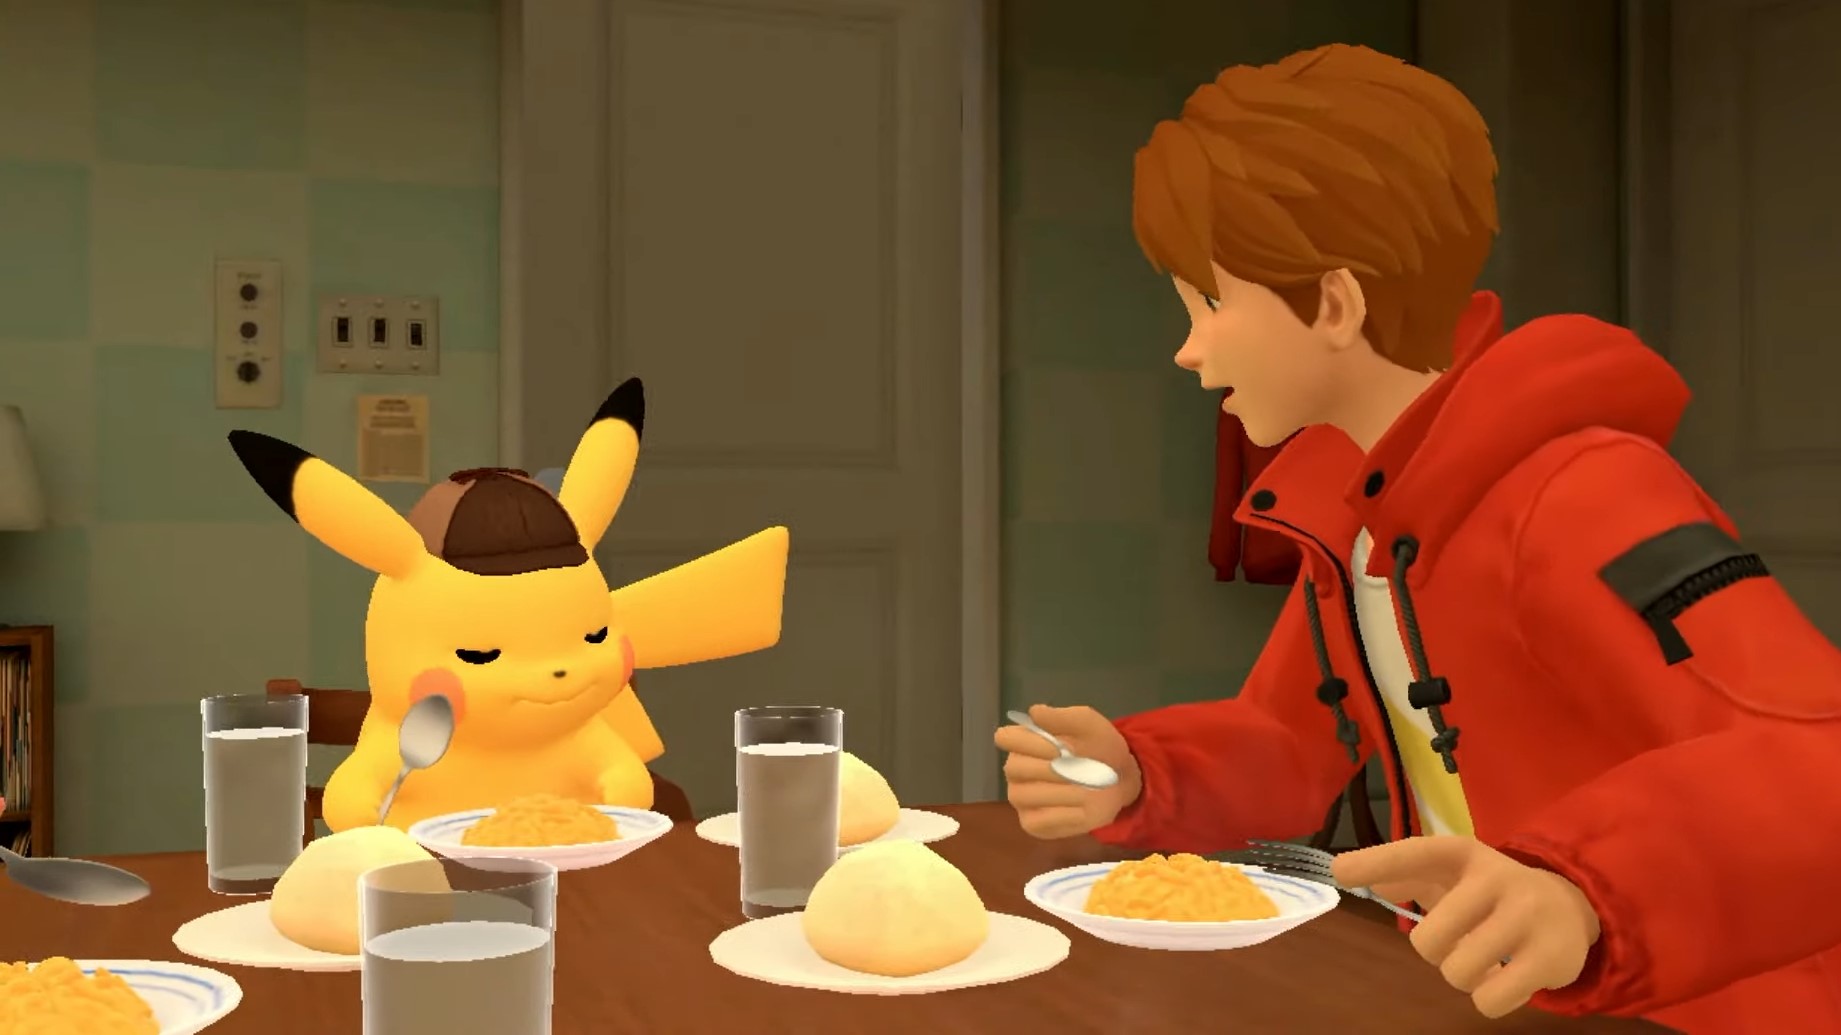 Pikachu with detective cap and boy with brown hair and red jacket eating breakfast